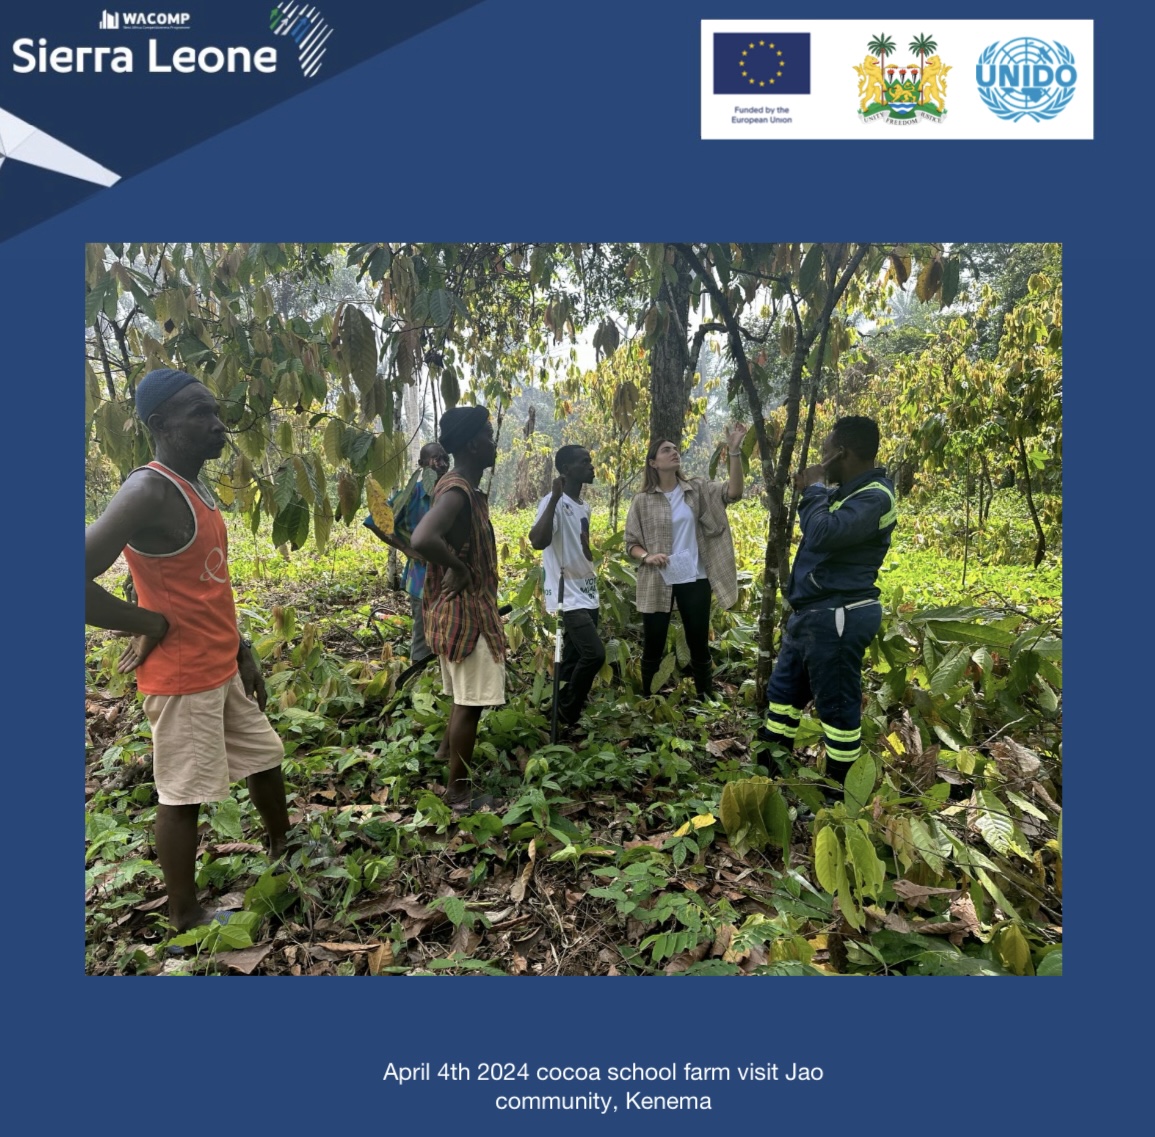 April 4th - the @EUinSierraLeone -funded #WACOMP_SL 🇸🇱@UNIDO Farmers in Kenema receive training about pest and disease management in #cocoa #farms. Due to #climate #change black pod disease is high in cocoa and spreads fast, farmers must maintain weekly removal to reduce loss.